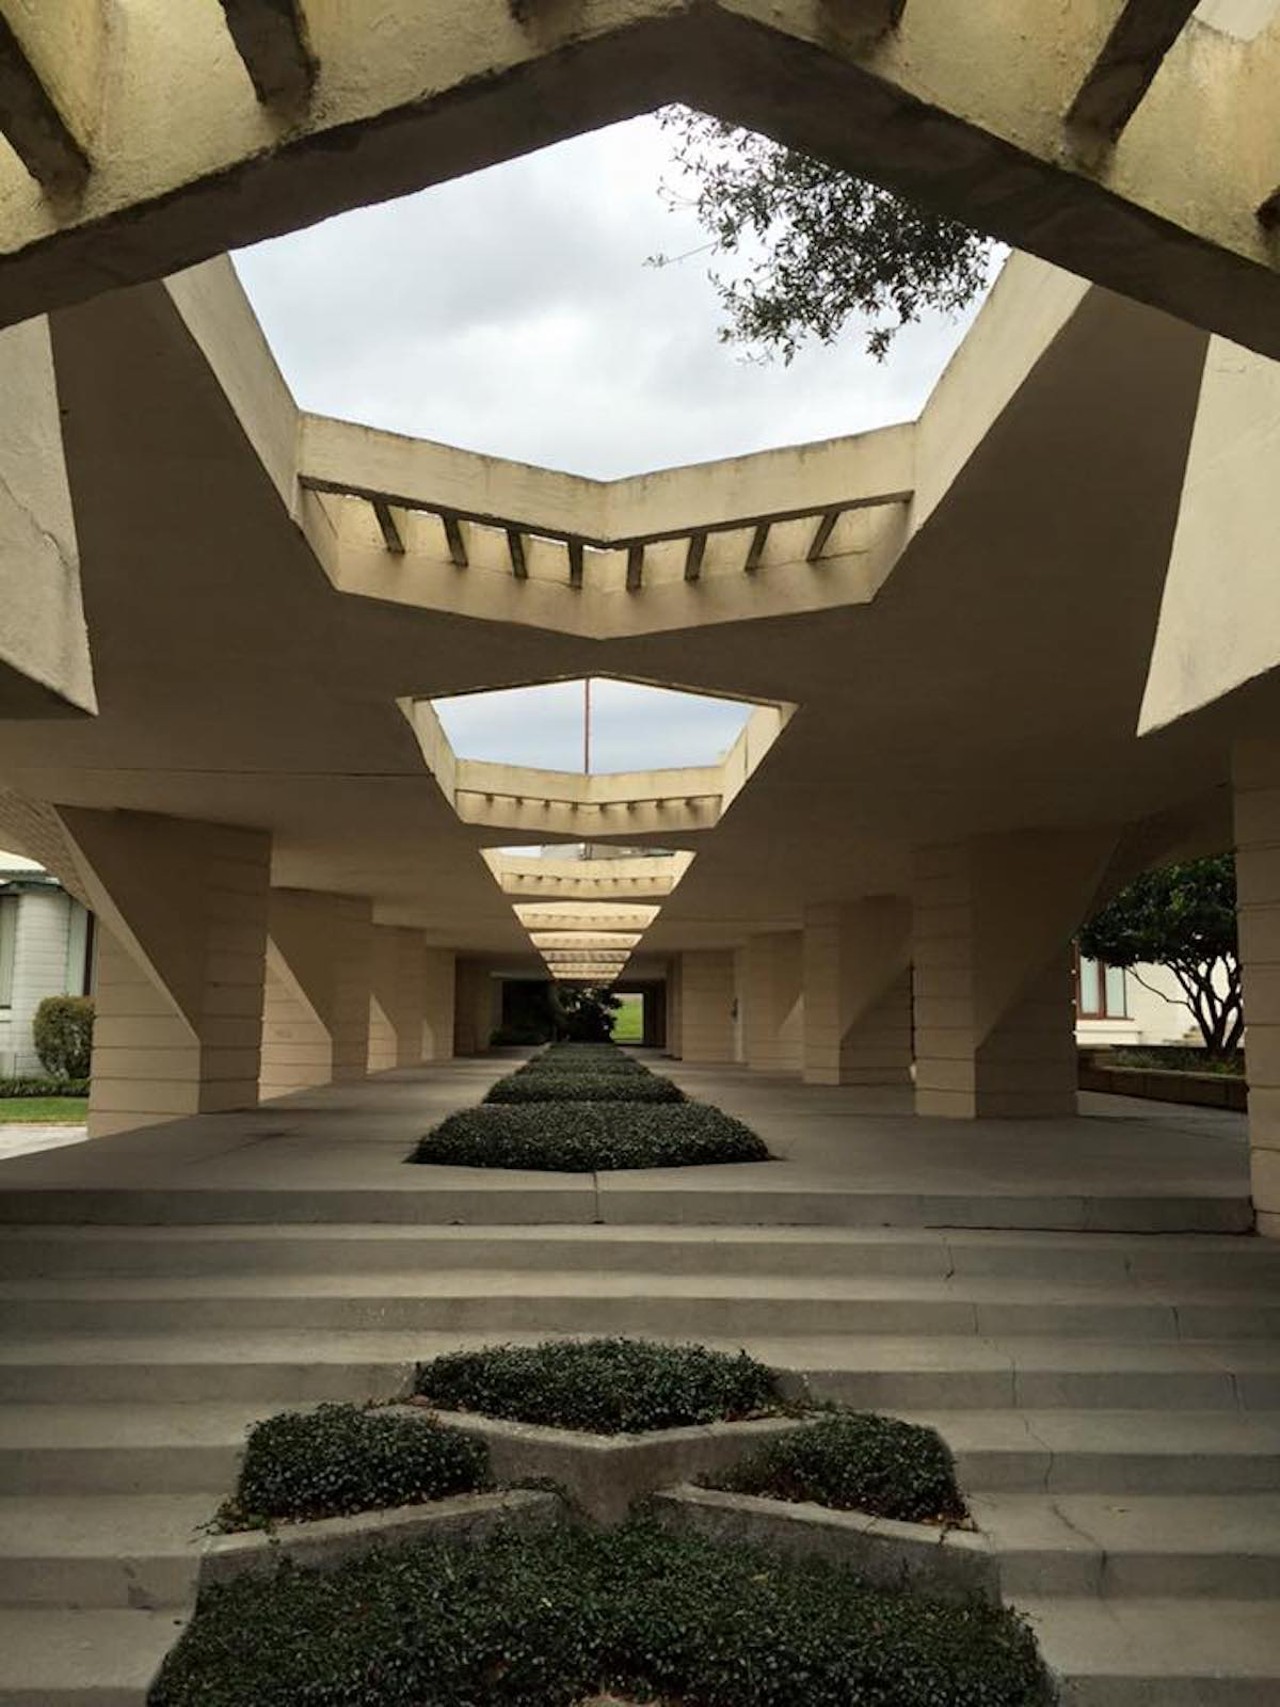 See the only college campus built by Frank Lloyd Wright in Lakeland840 Johnson Ave., Lakeland. (863)680-4597 At Florida Southern, you can tour the Child of the Sun campus and see the Frank Lloyd Wright's work in action.